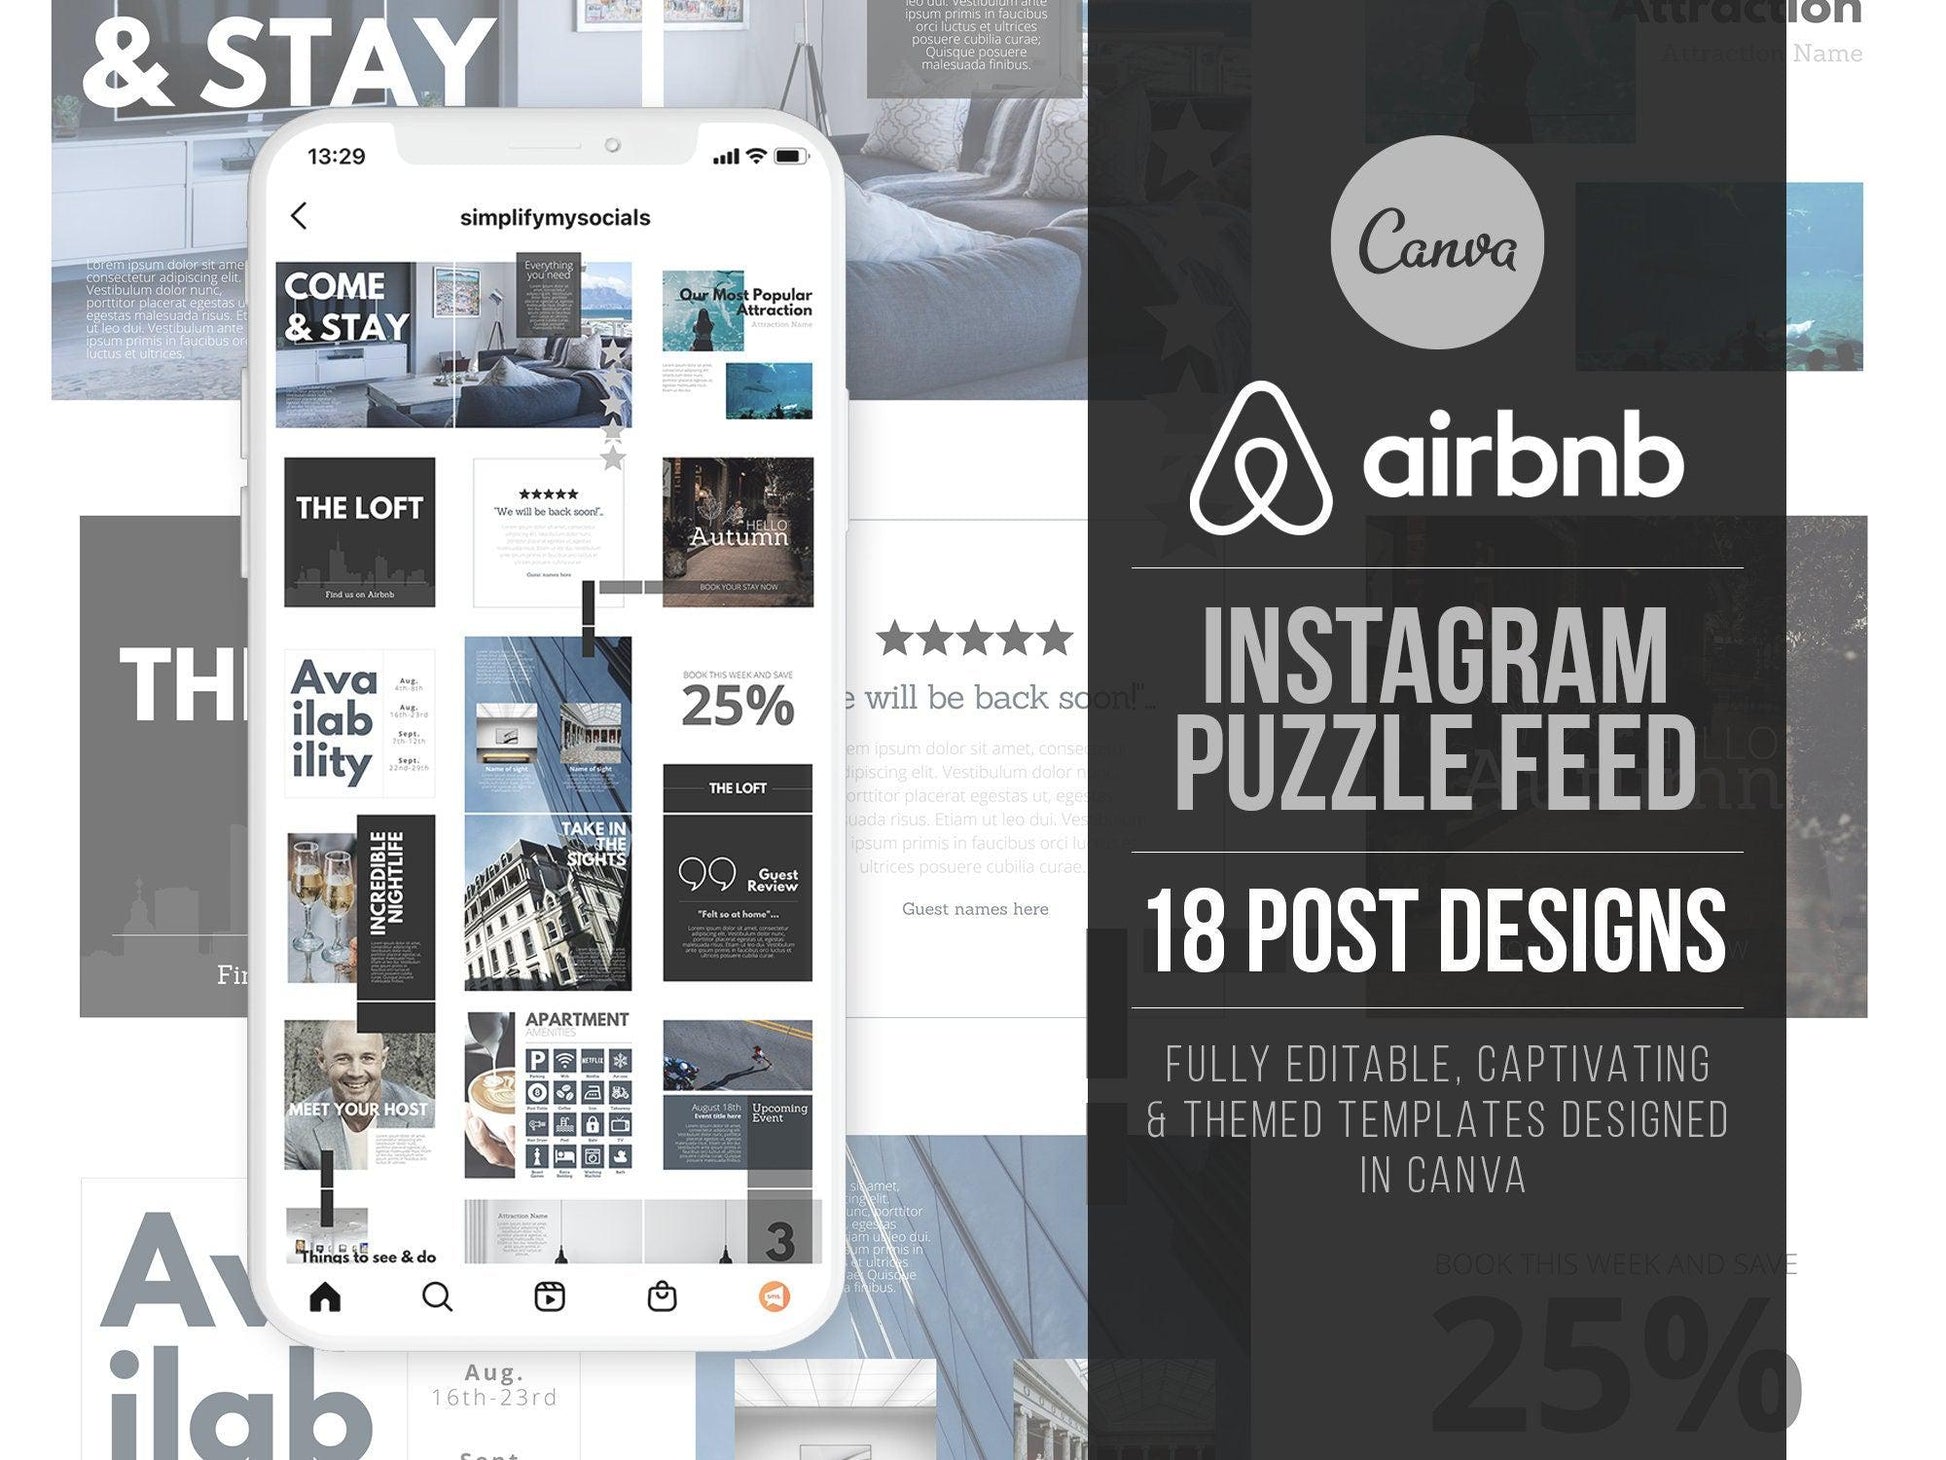 Airbnb Instagram Puzzle For Social Media (city)